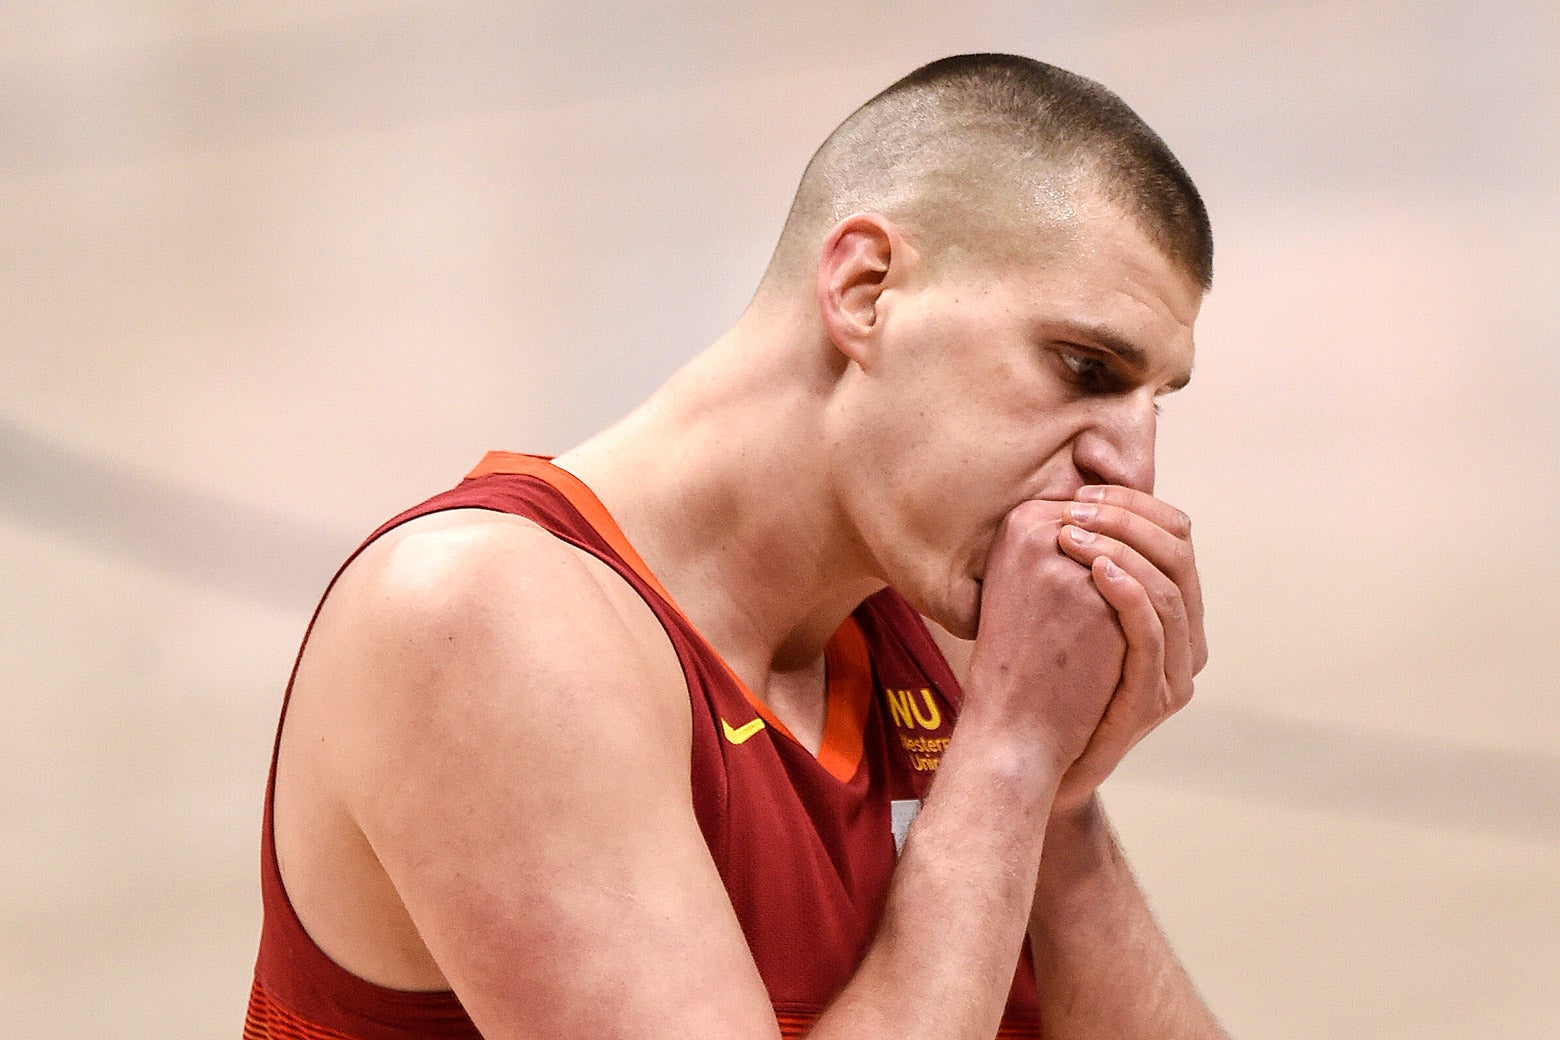 Jokić, wearing a red jersey, blows into his cupped hands during a game.